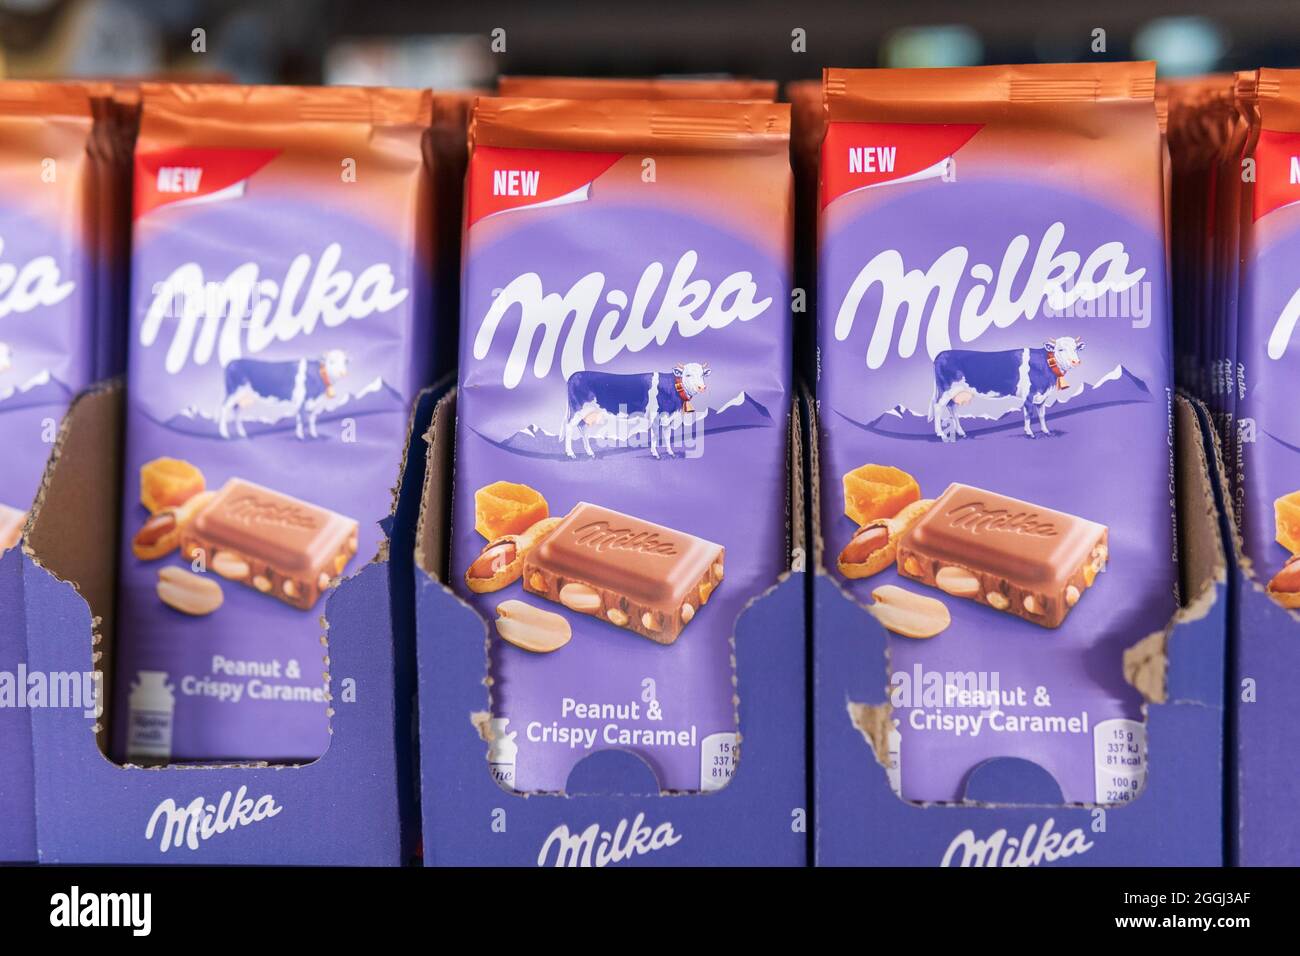 An innovative stick launch from Milka